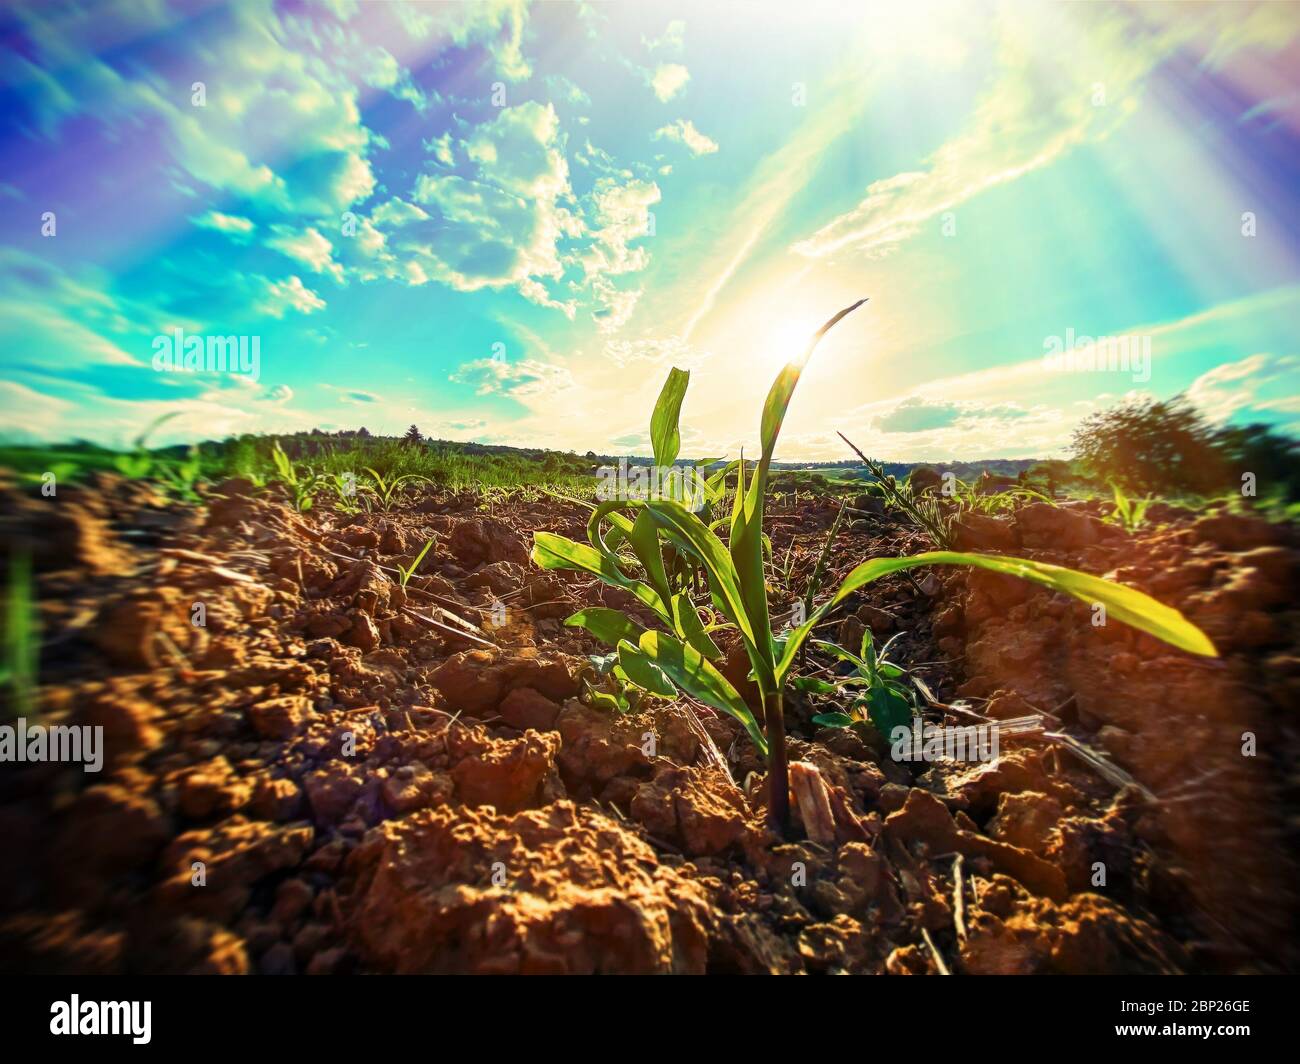 Hot day on a agricultural field Stock Photo